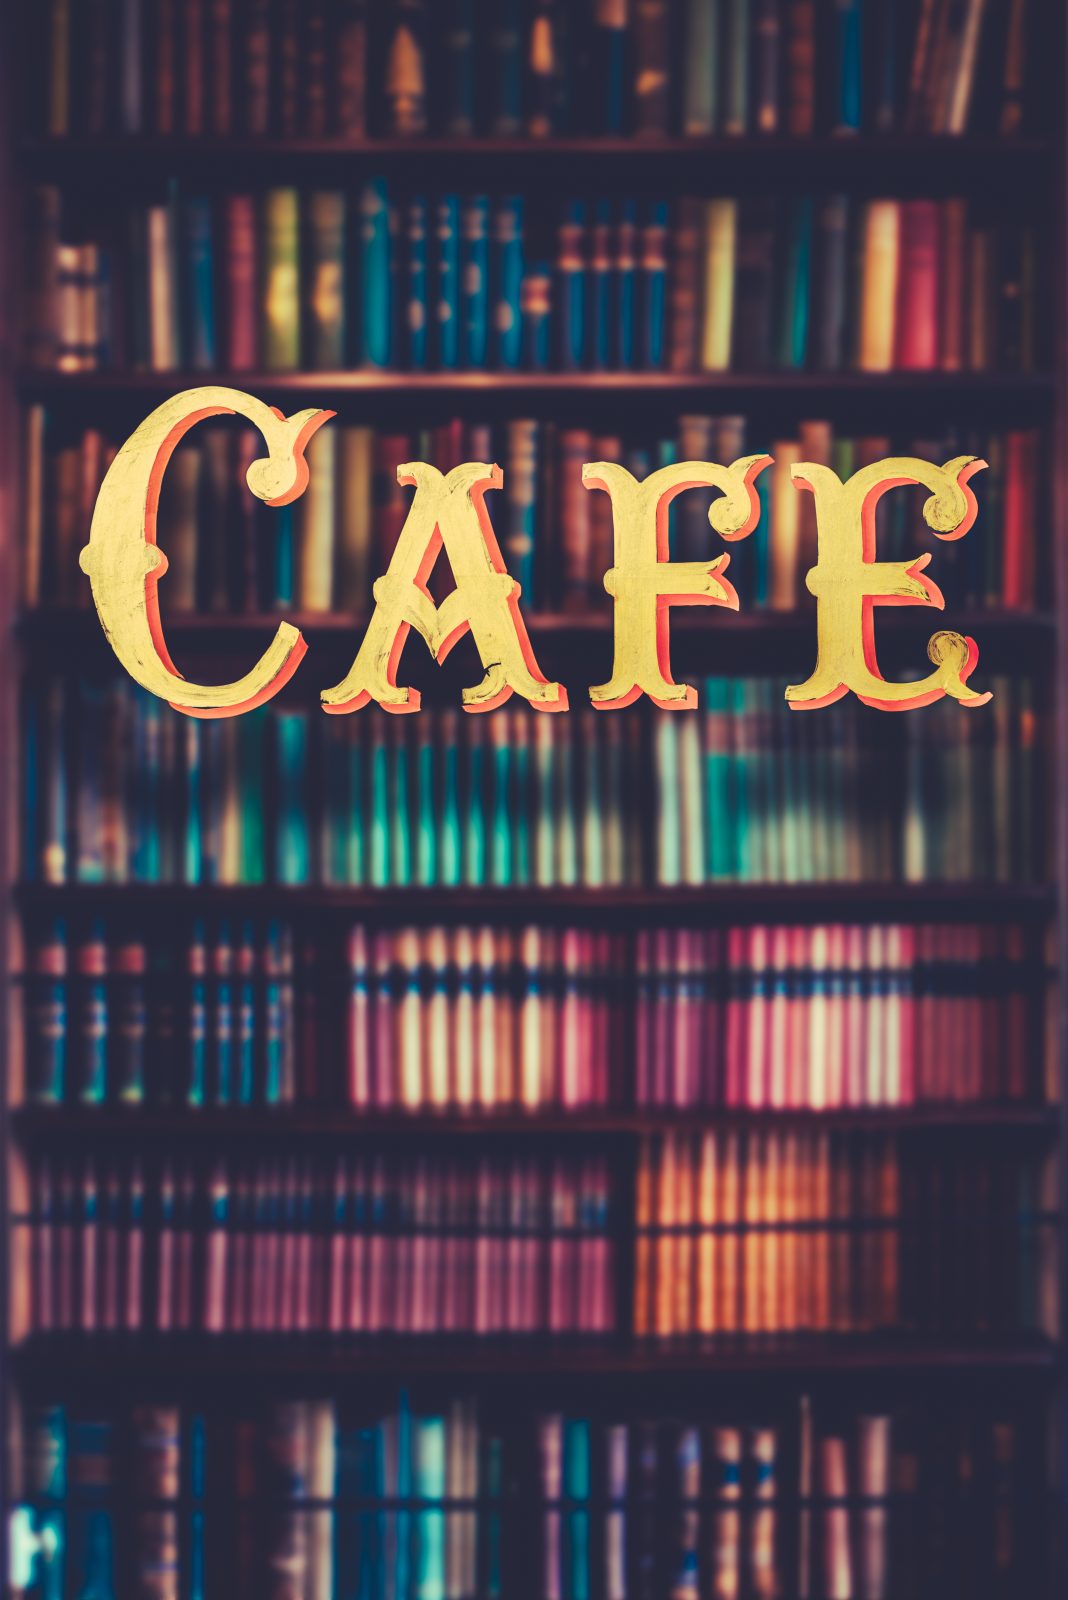 Book Store Cafe